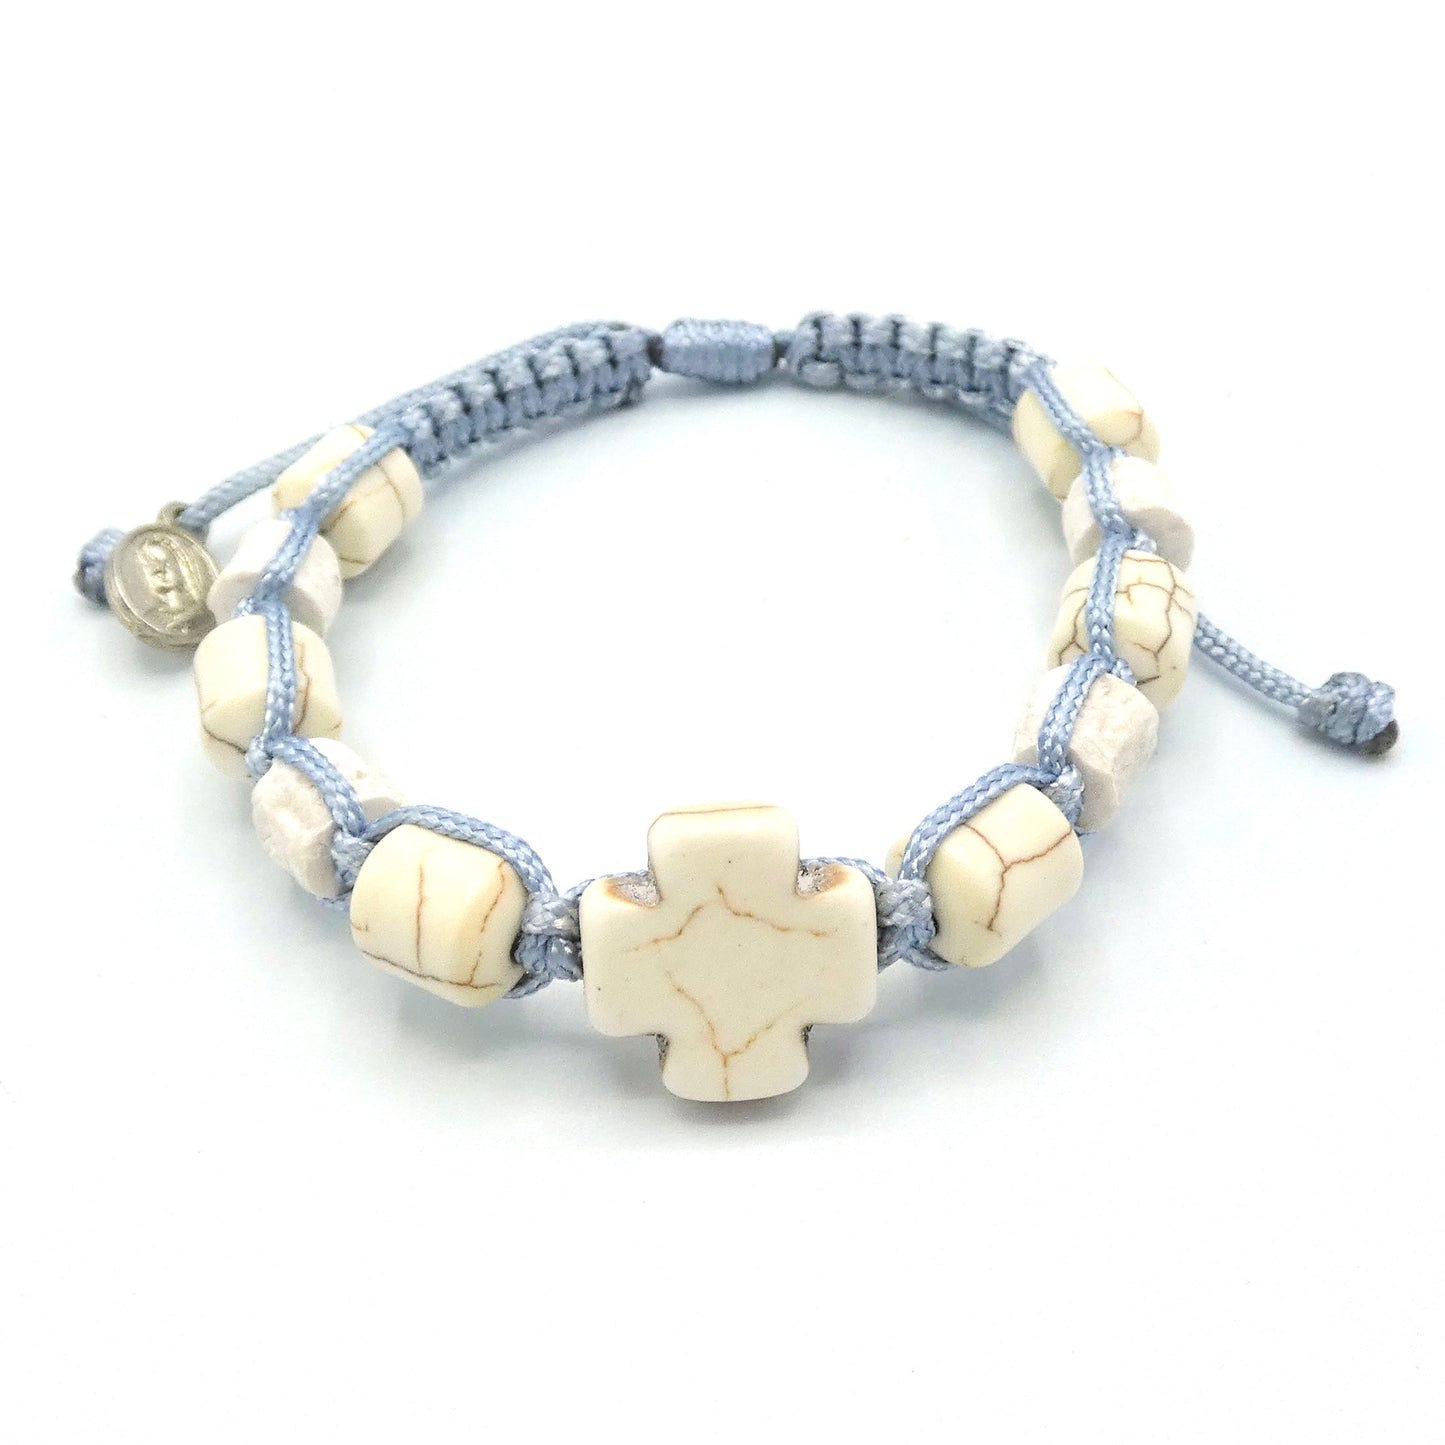 Square Stone Cross and Bead Decade Rosary Bracelet of Assorted Colors